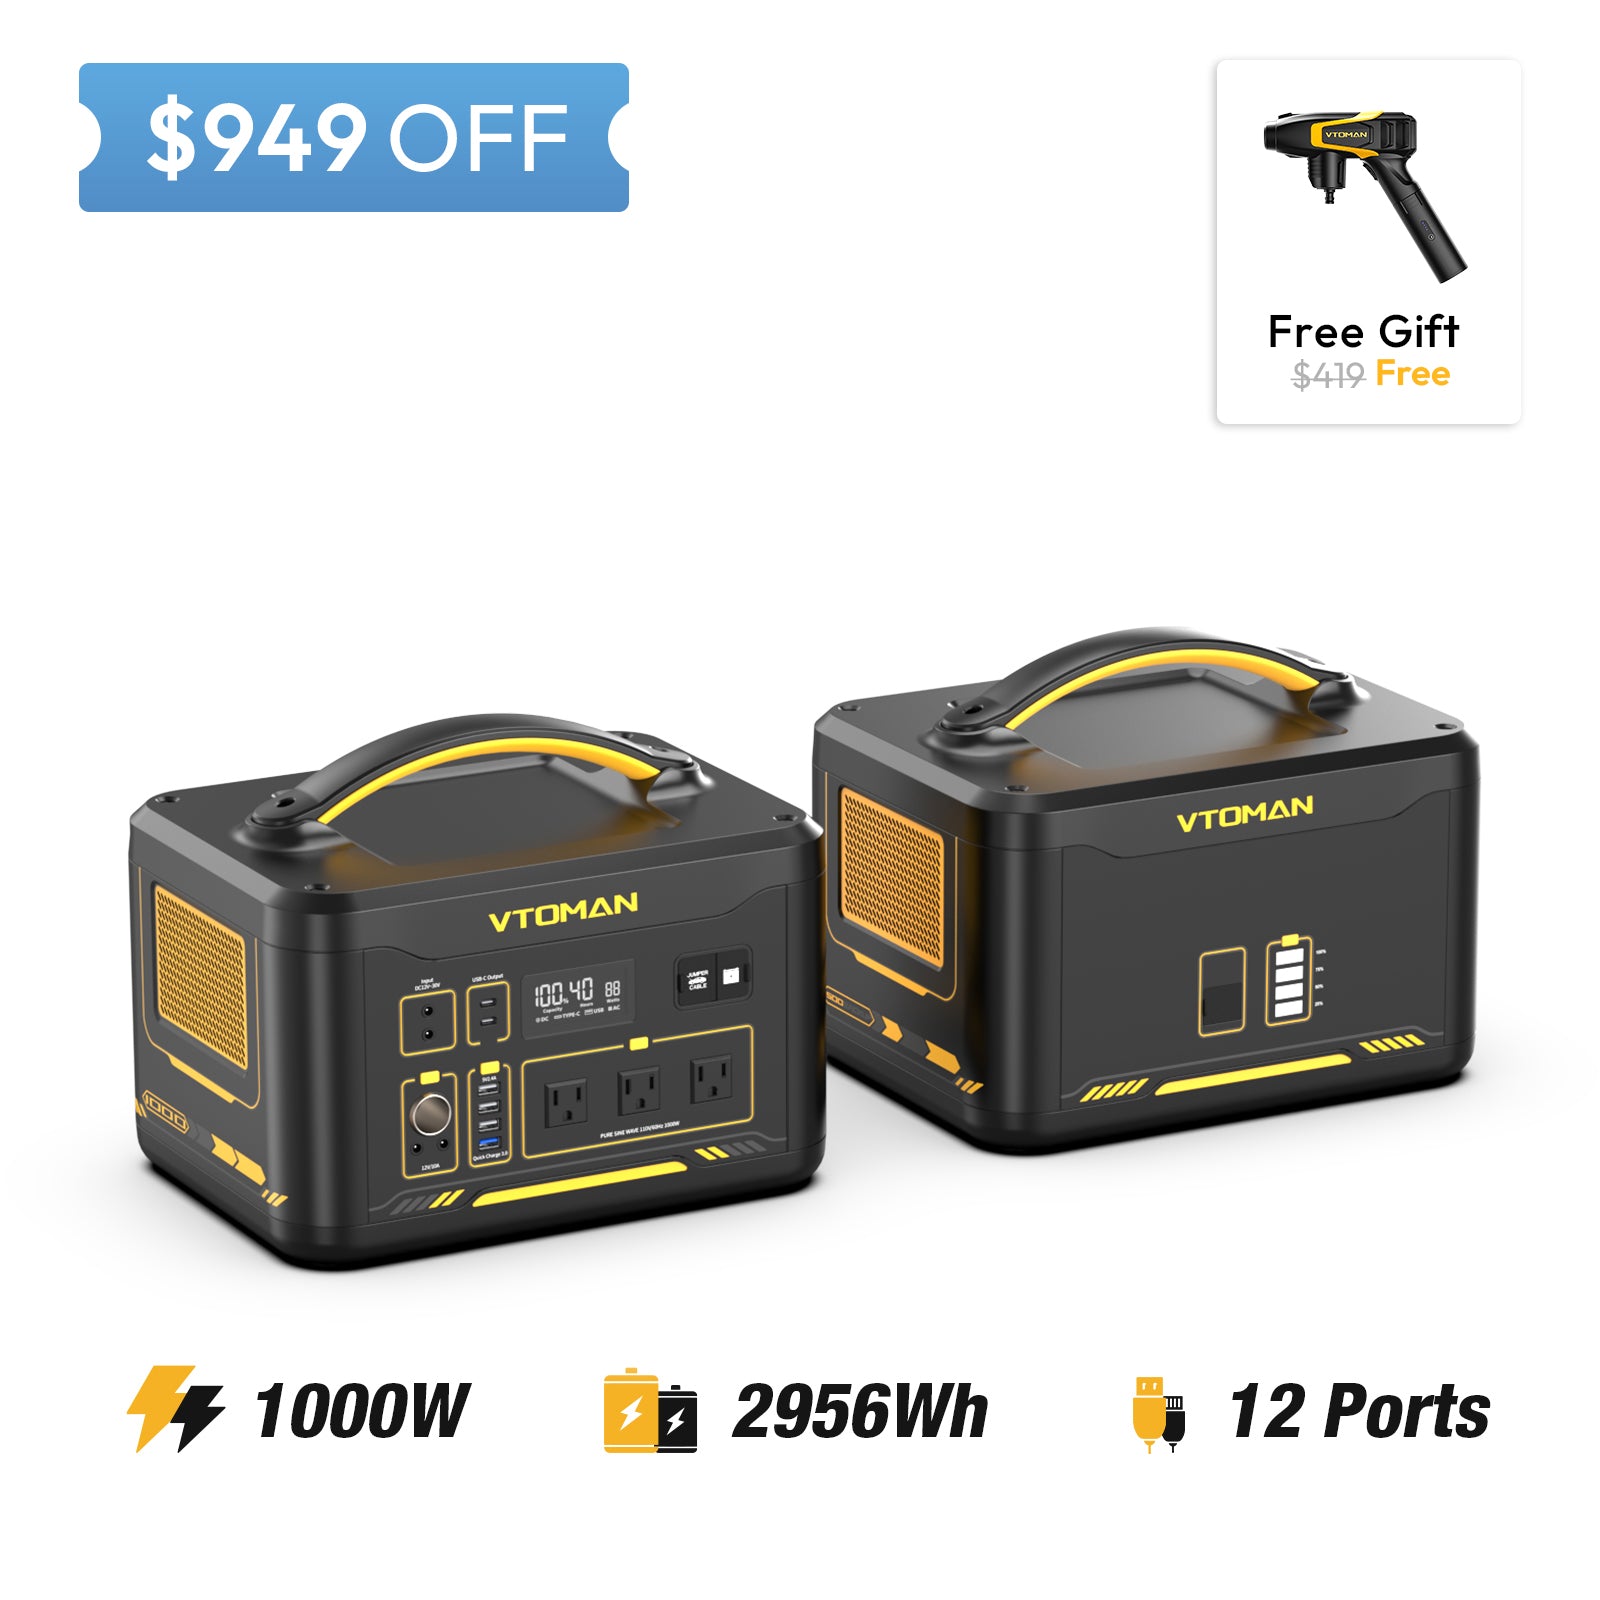 jump 1000 and 1548wh extra battery save $949 in summer sale